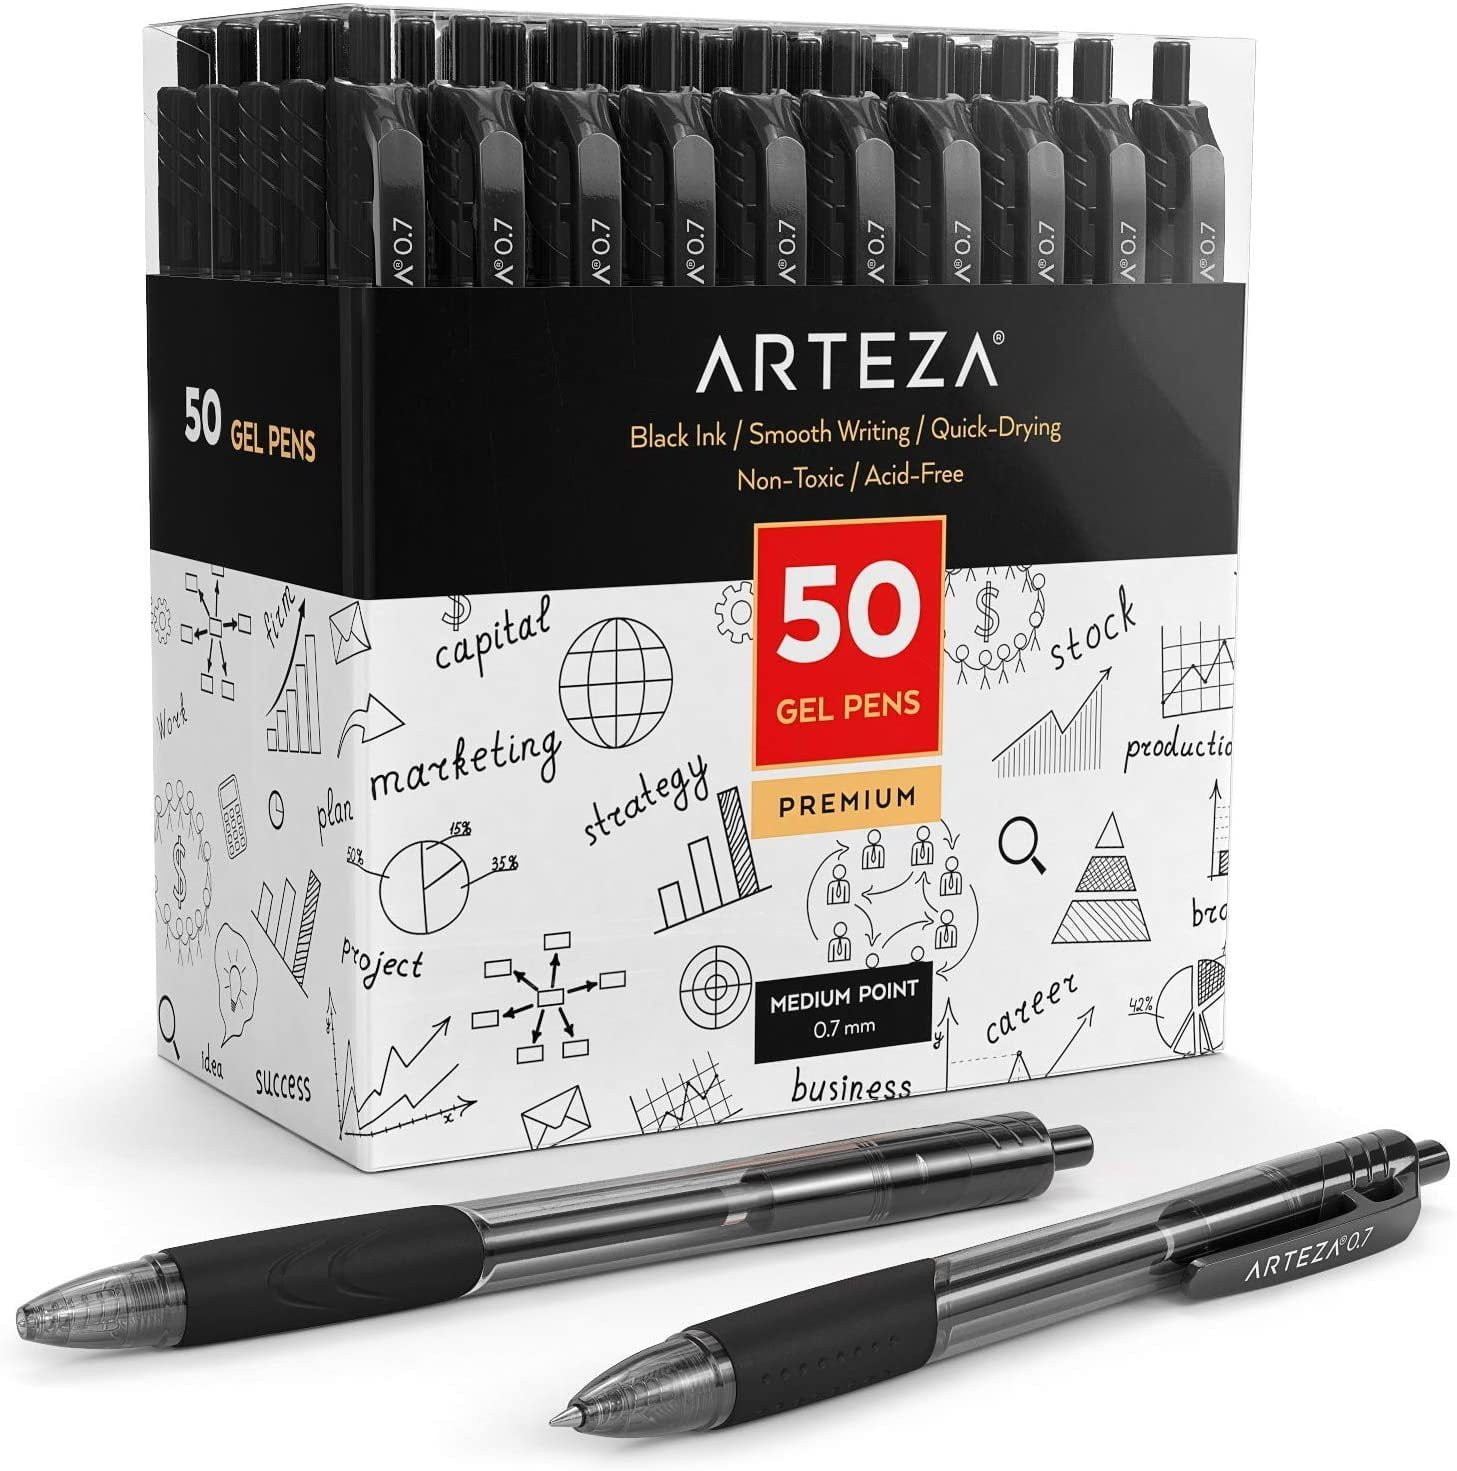  Jinja Brands 12 PCS Retractable Gel Pens Set with Black Ink - Best  Pens for Smooth Writing & Comfortable Grip - Cute Pens for Journaling -  Great for School, Office, or